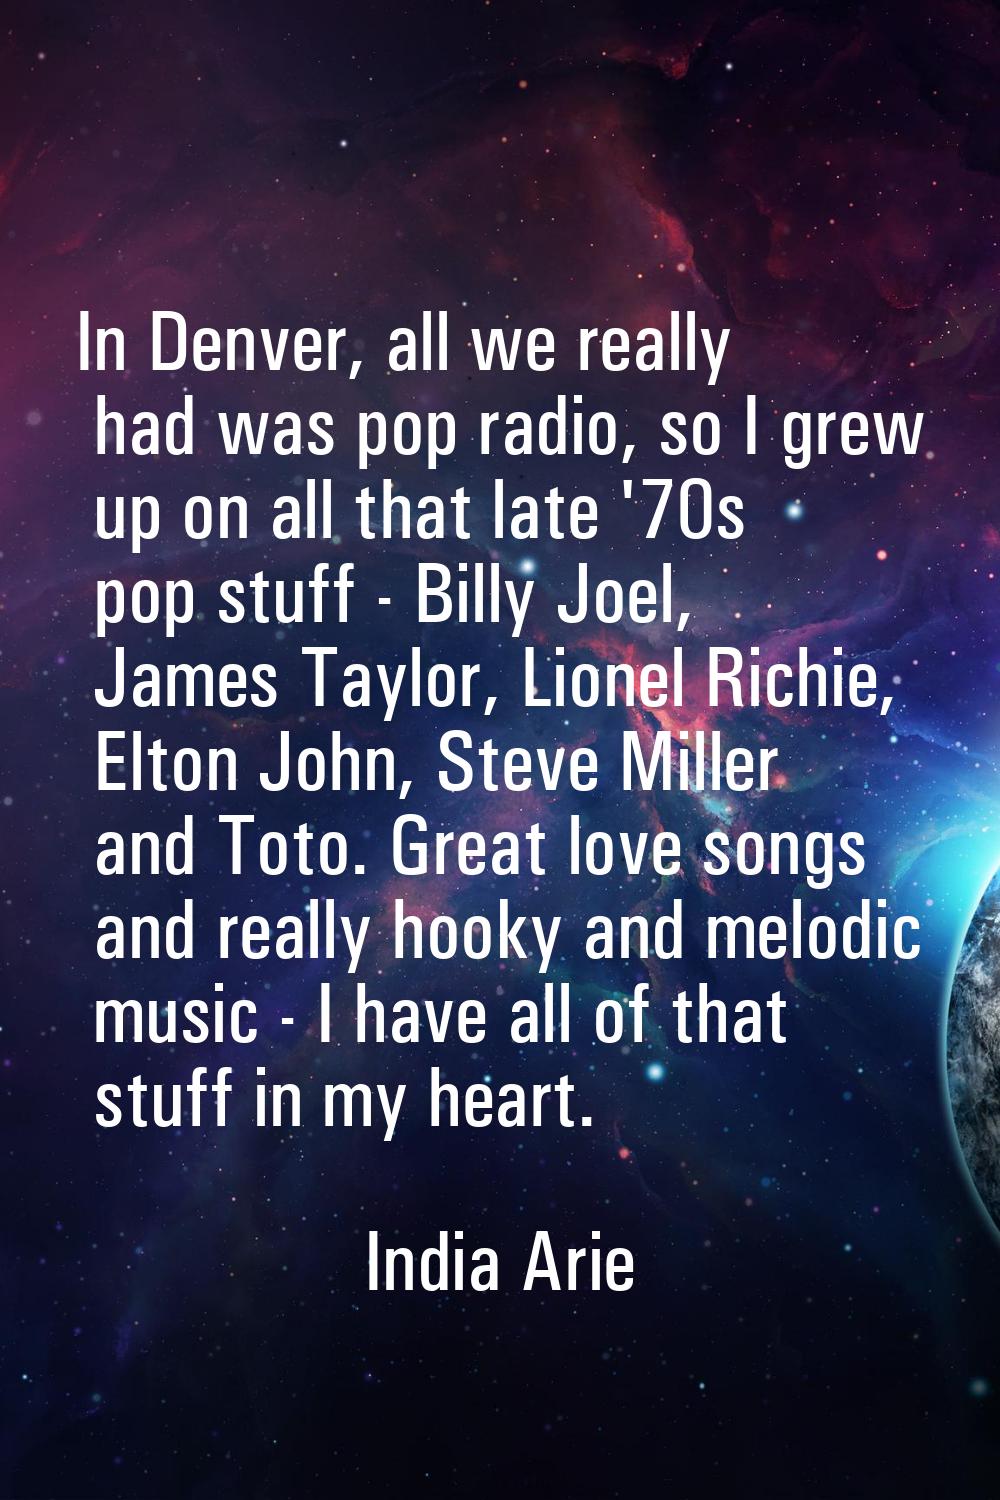 In Denver, all we really had was pop radio, so I grew up on all that late '70s pop stuff - Billy Jo